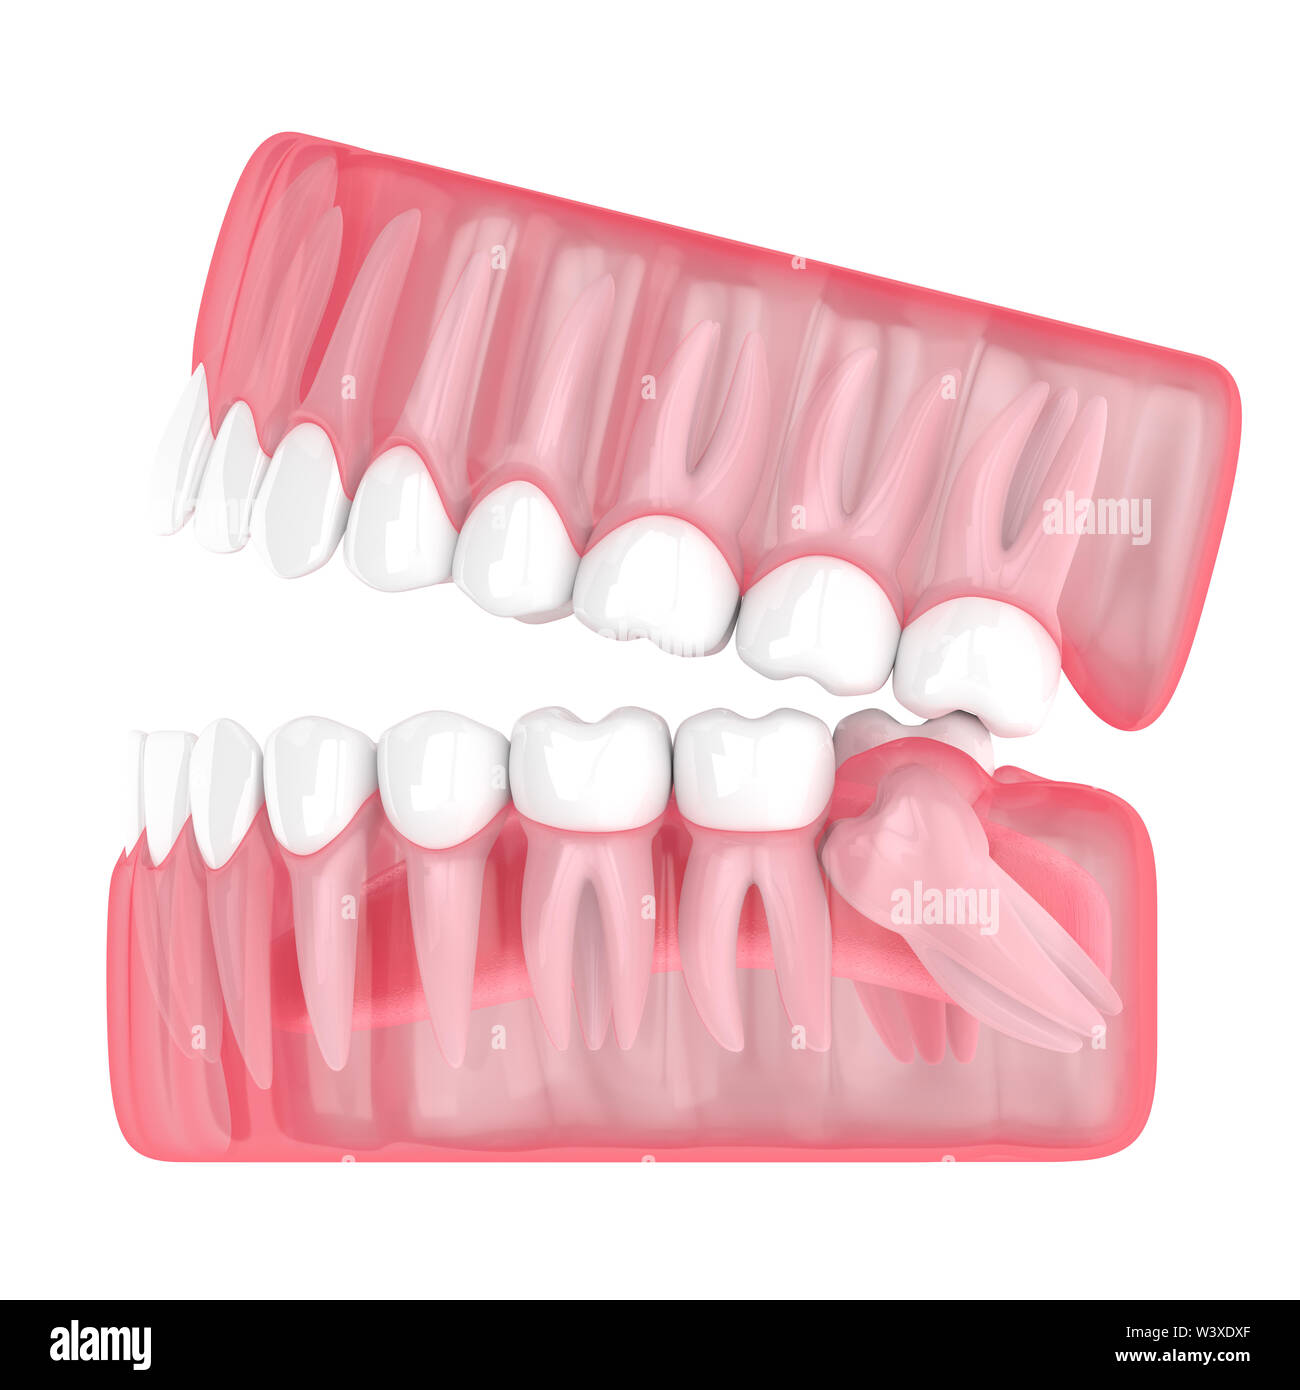 3d render of jaw with wisdom mesial impaction over white background. Concept of different types of wisdom teeth problems. Stock Photo